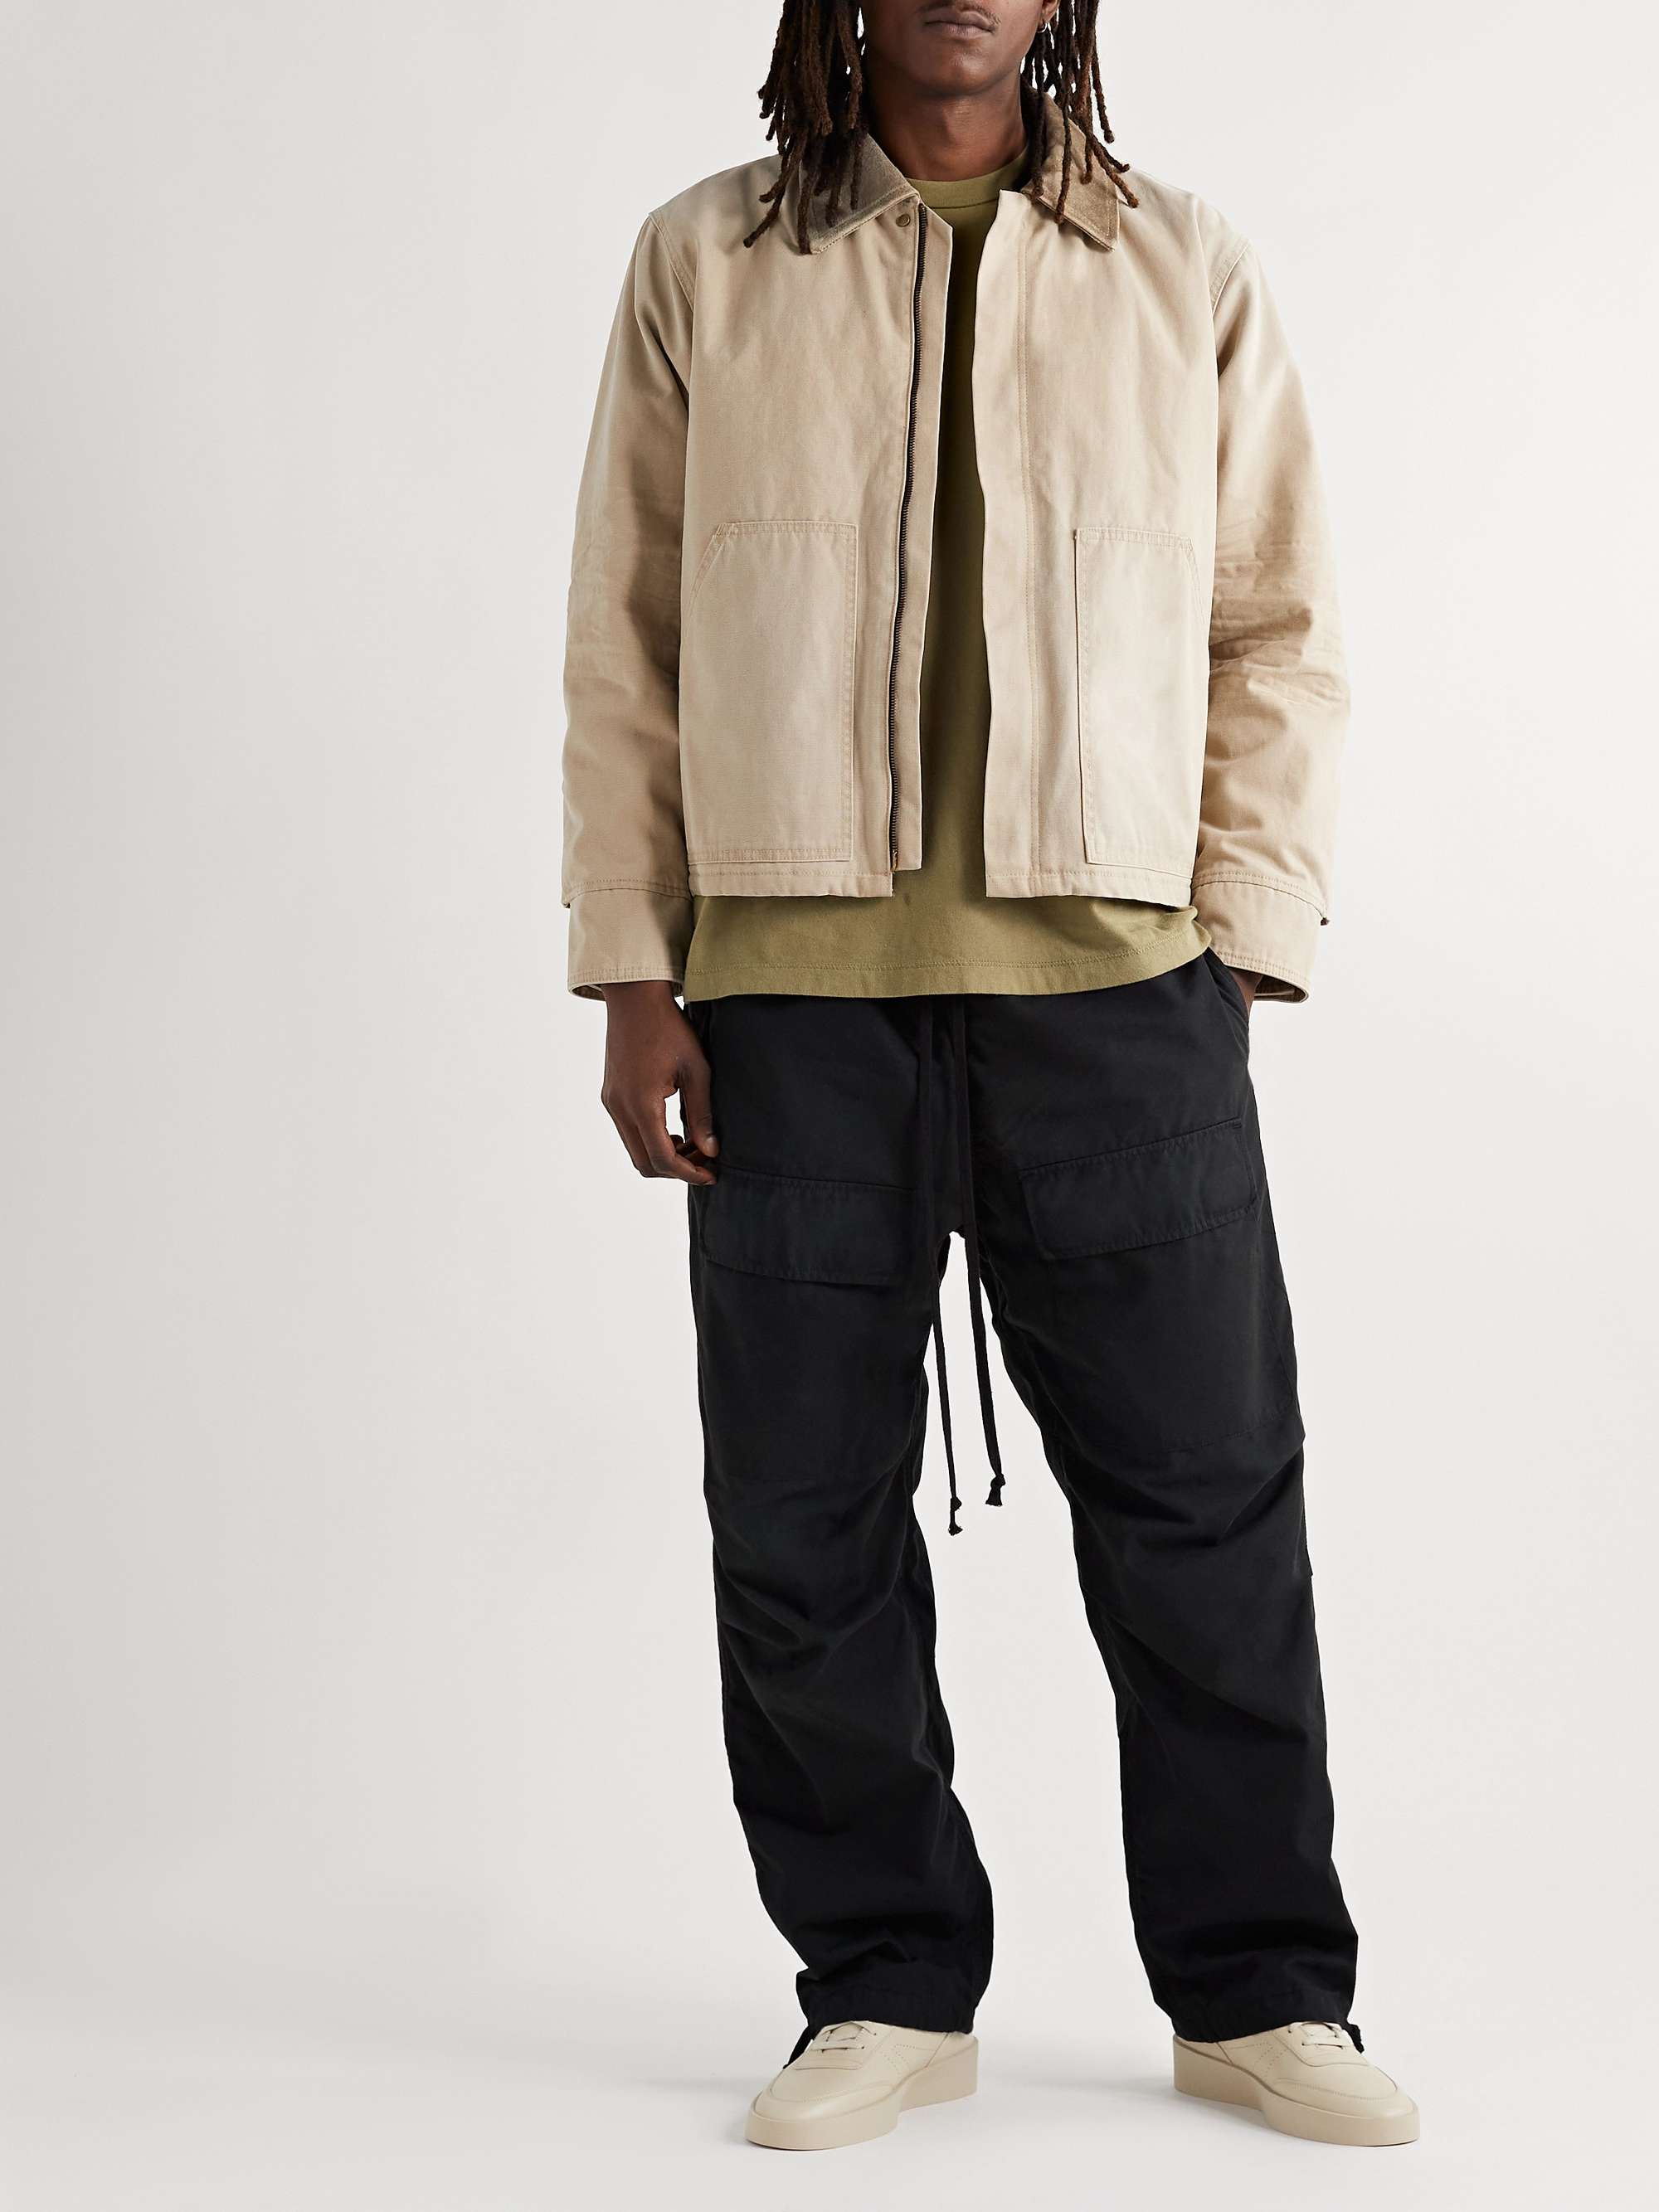 FEAR OF GOD Leather-Trimmed Distressed Canvas Jacket